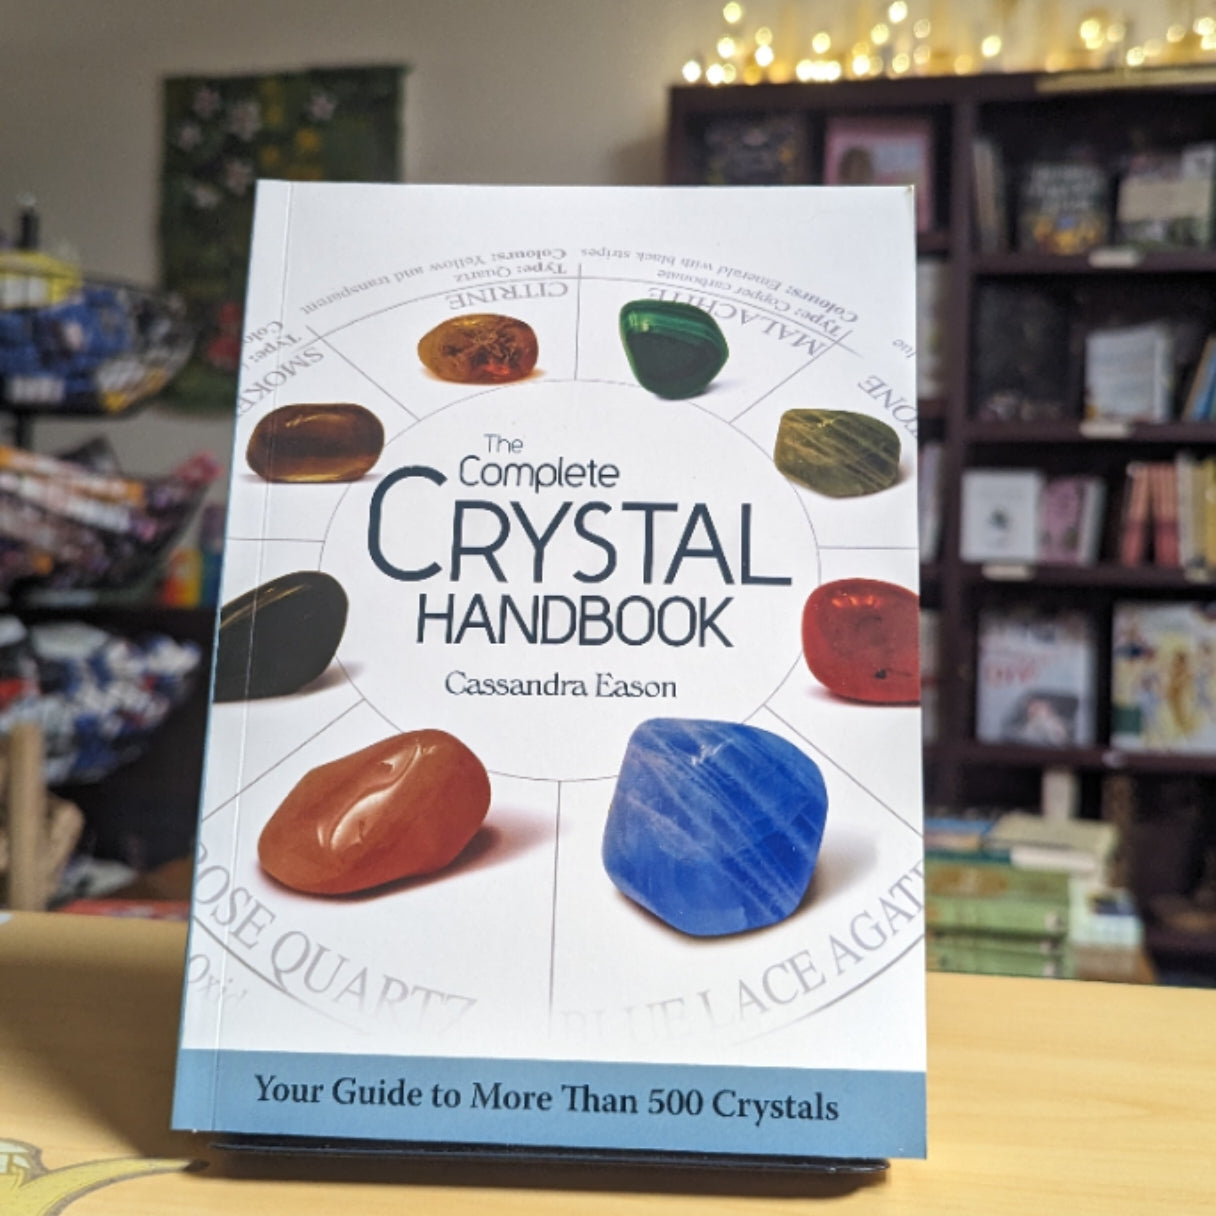 The Complete Crystal Handbook: Your Guide to More than 500 Crystals